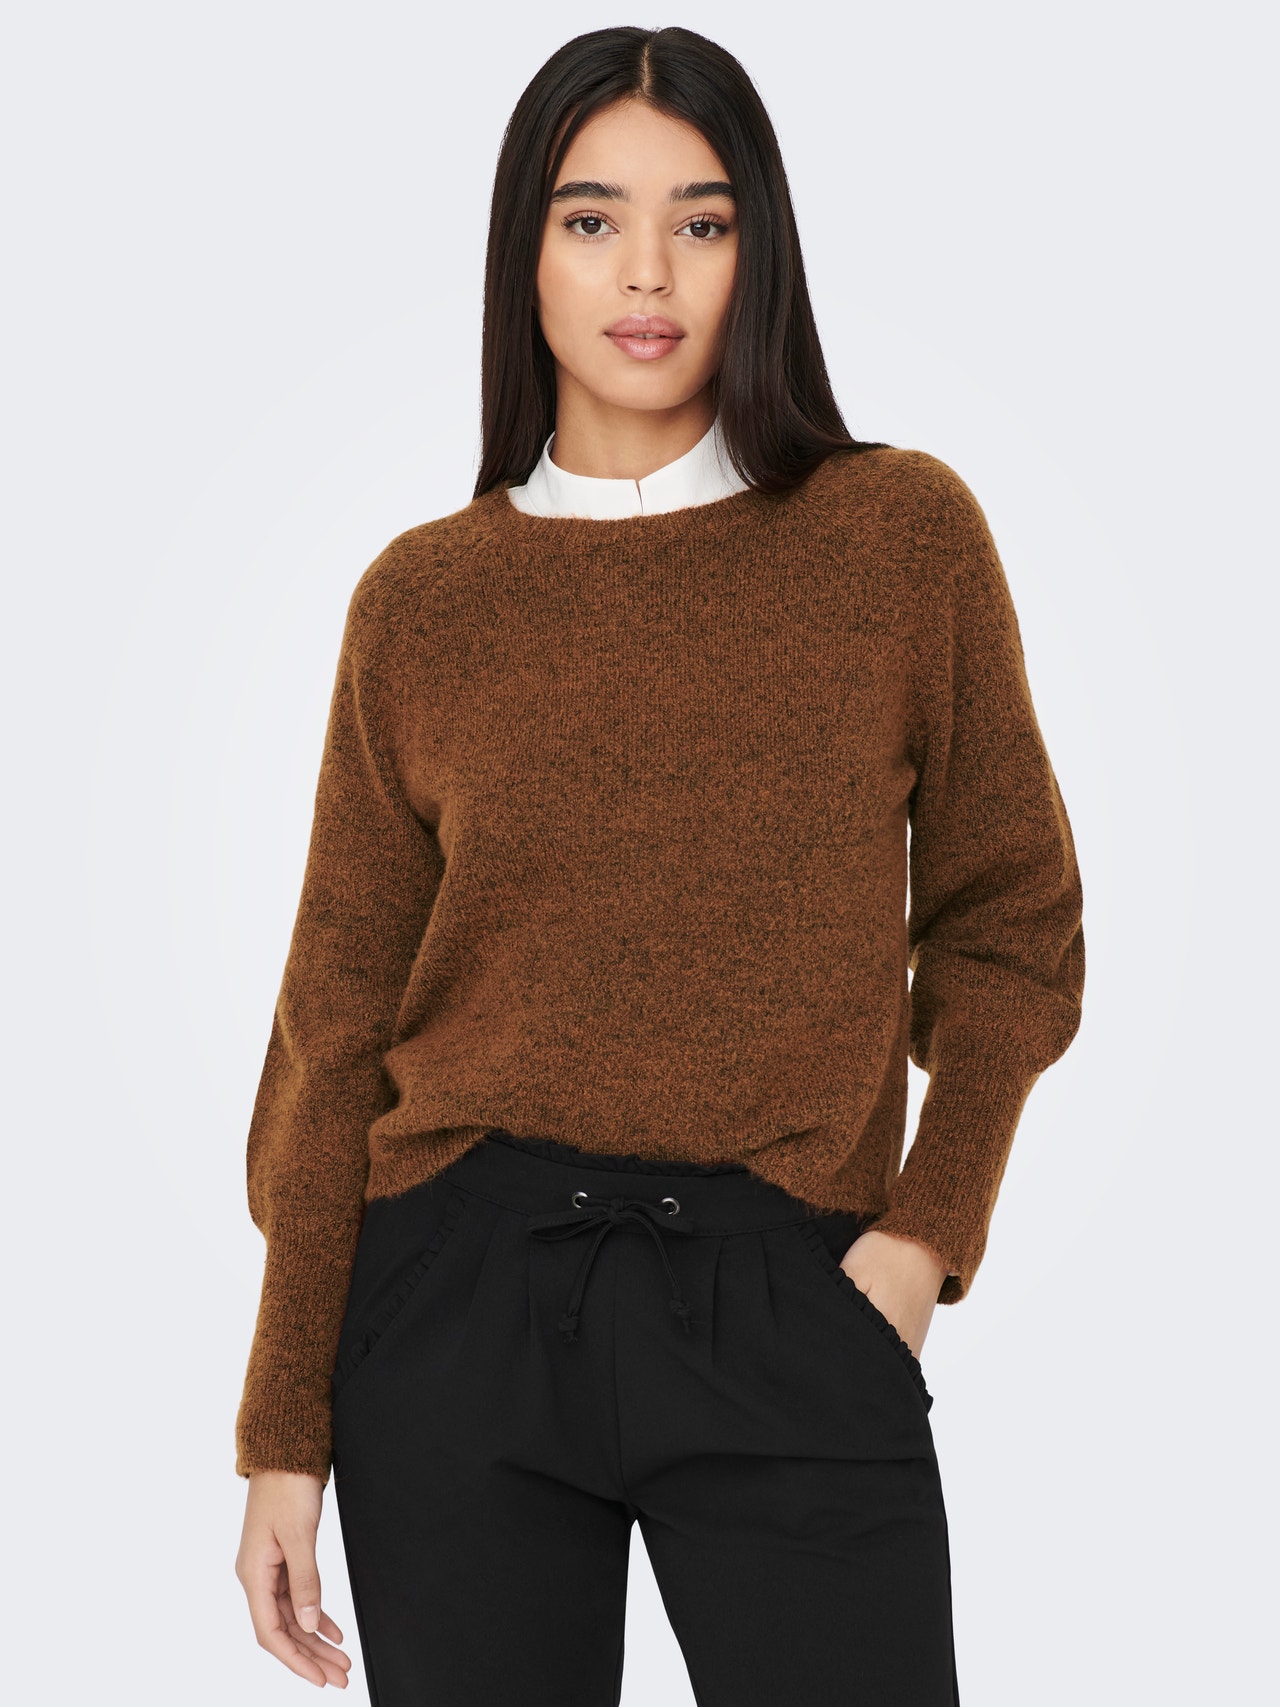 ONLY Button cuff Knitted Pullover -Argan Oil - 15270980